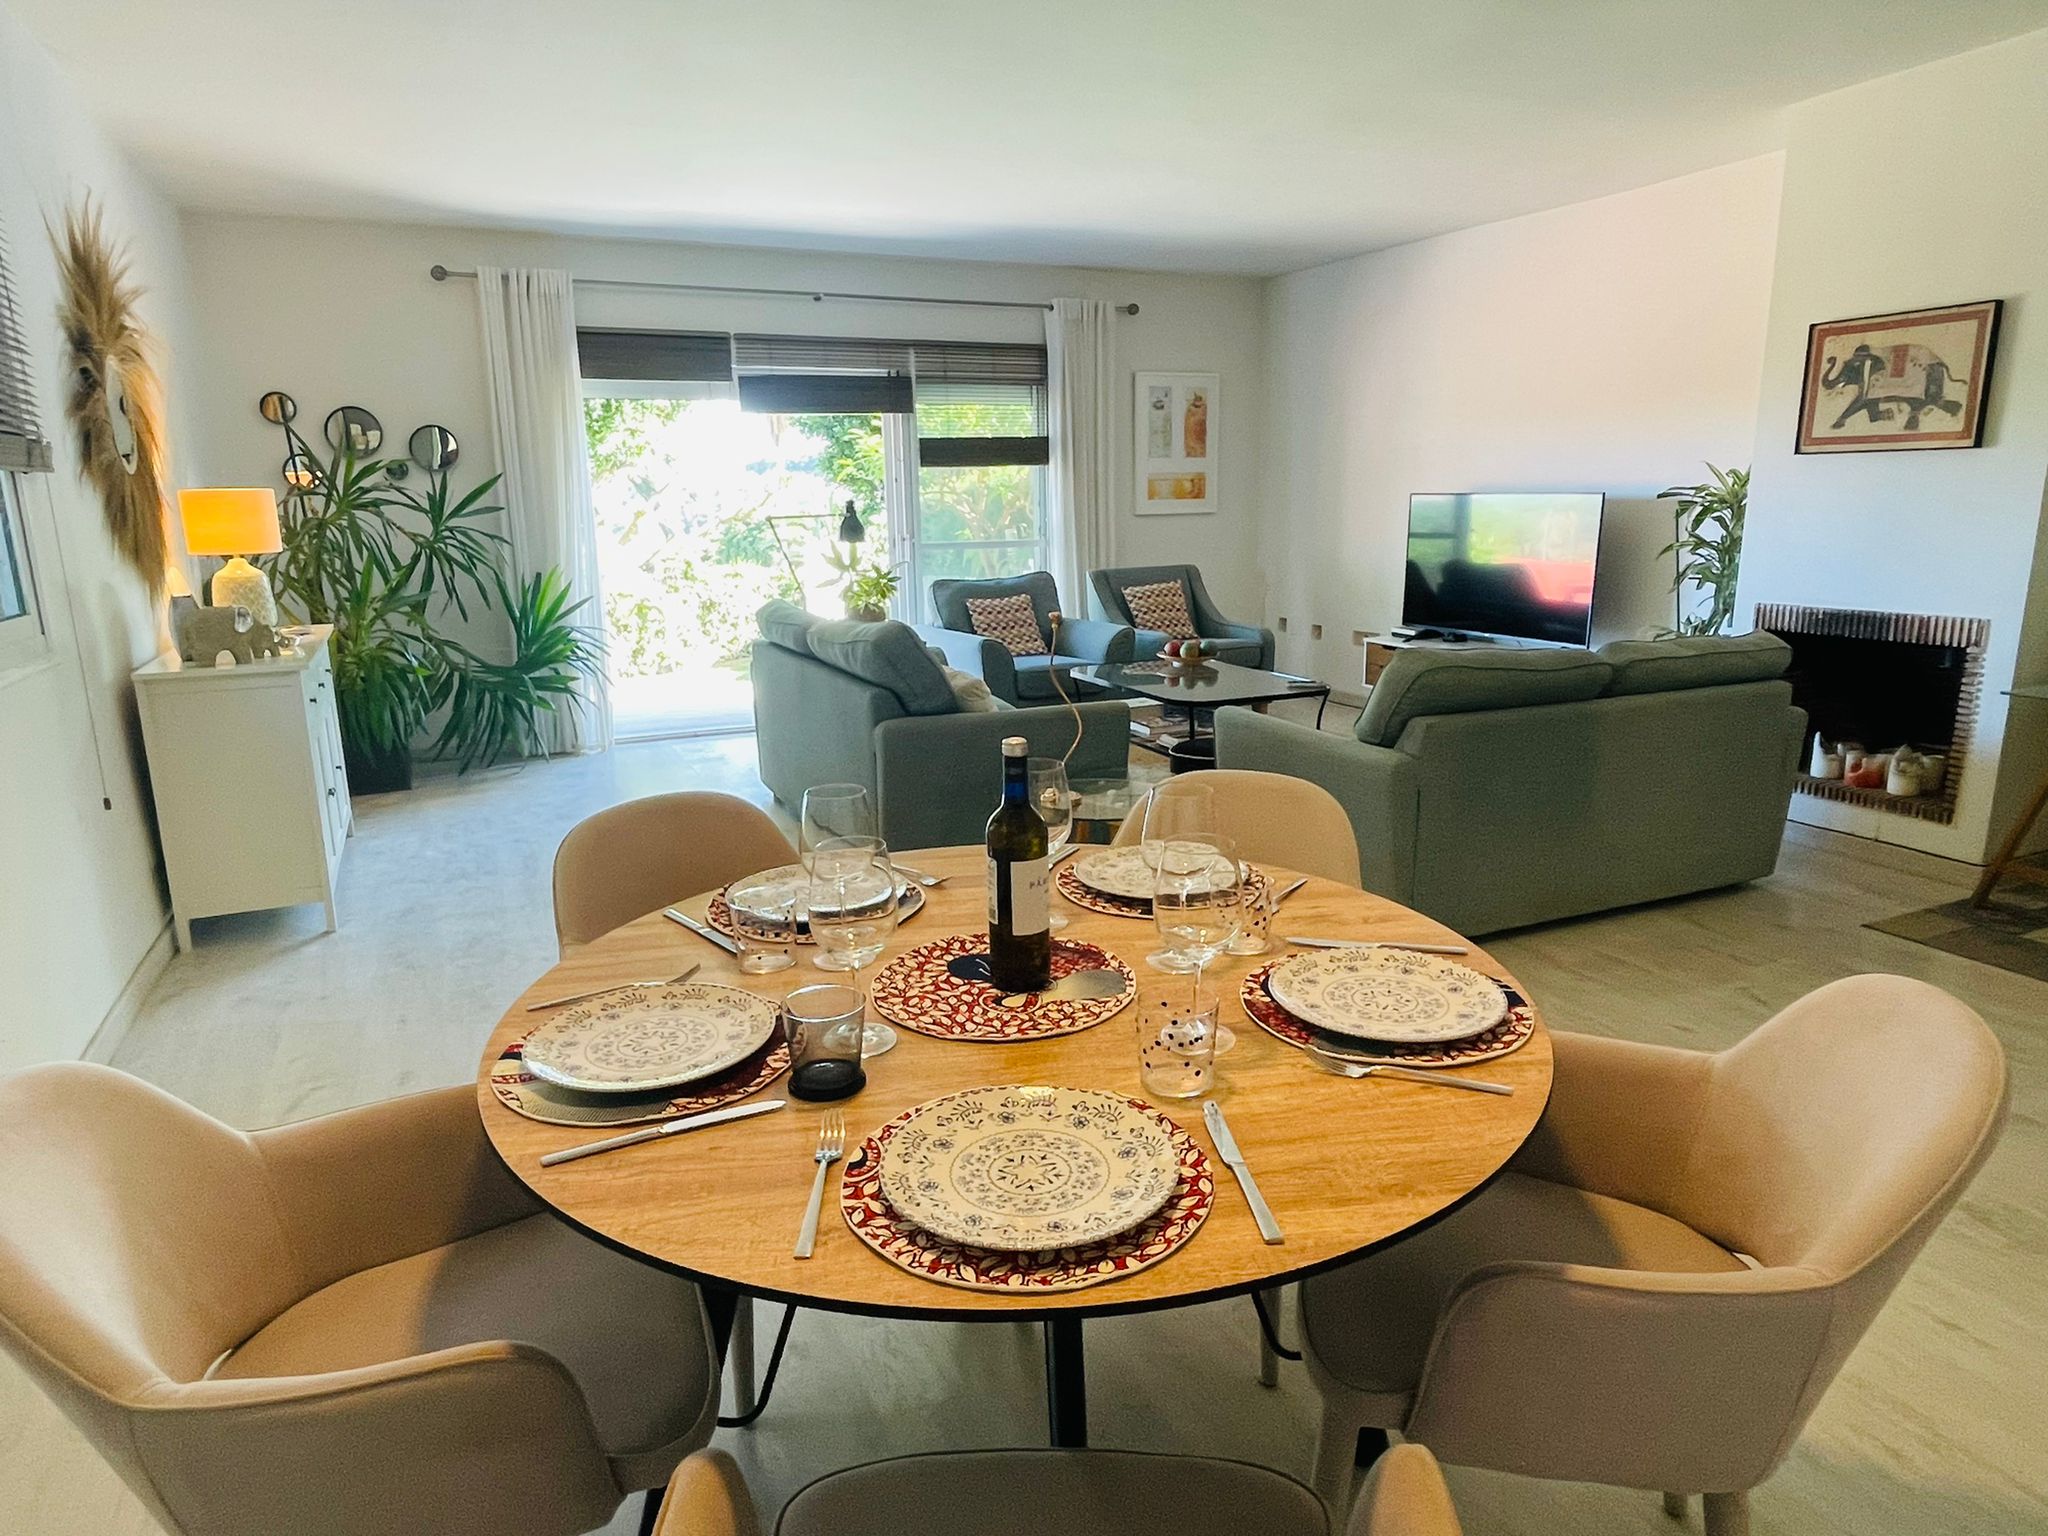 House for rent in Benalmadena, Malaga, dining room